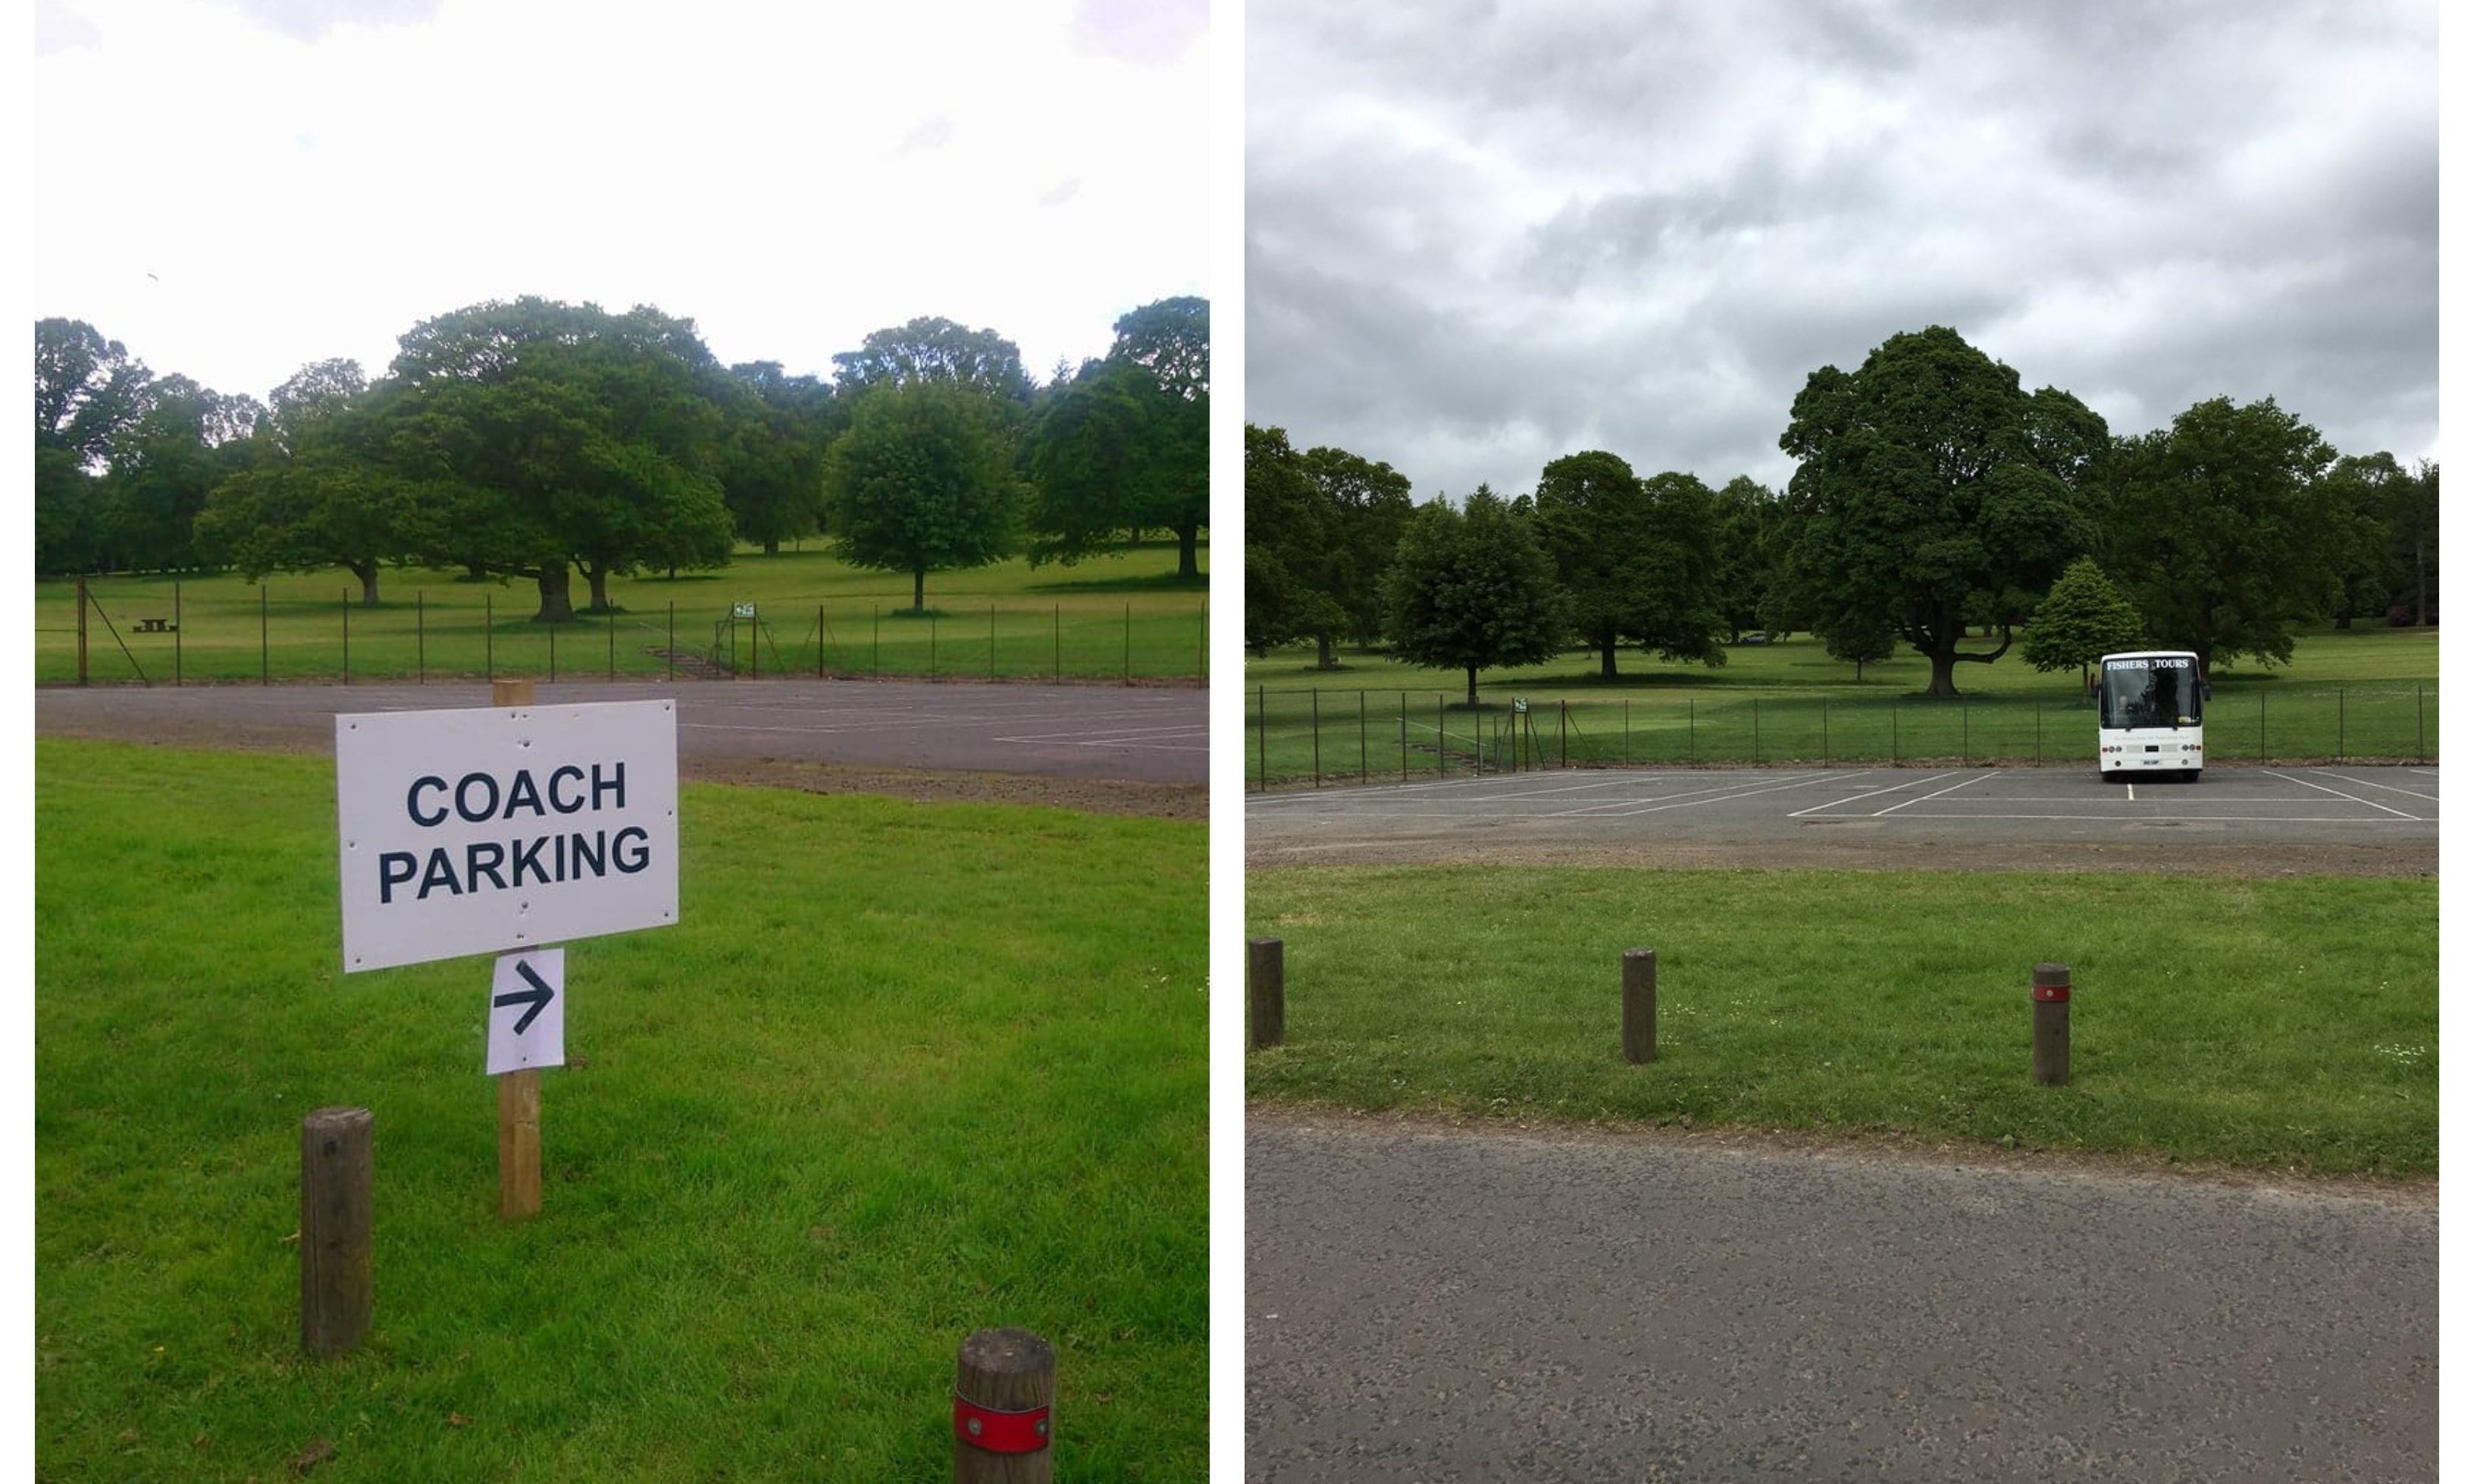 The tennis courts at Camperdown Park are being used as a parking facility